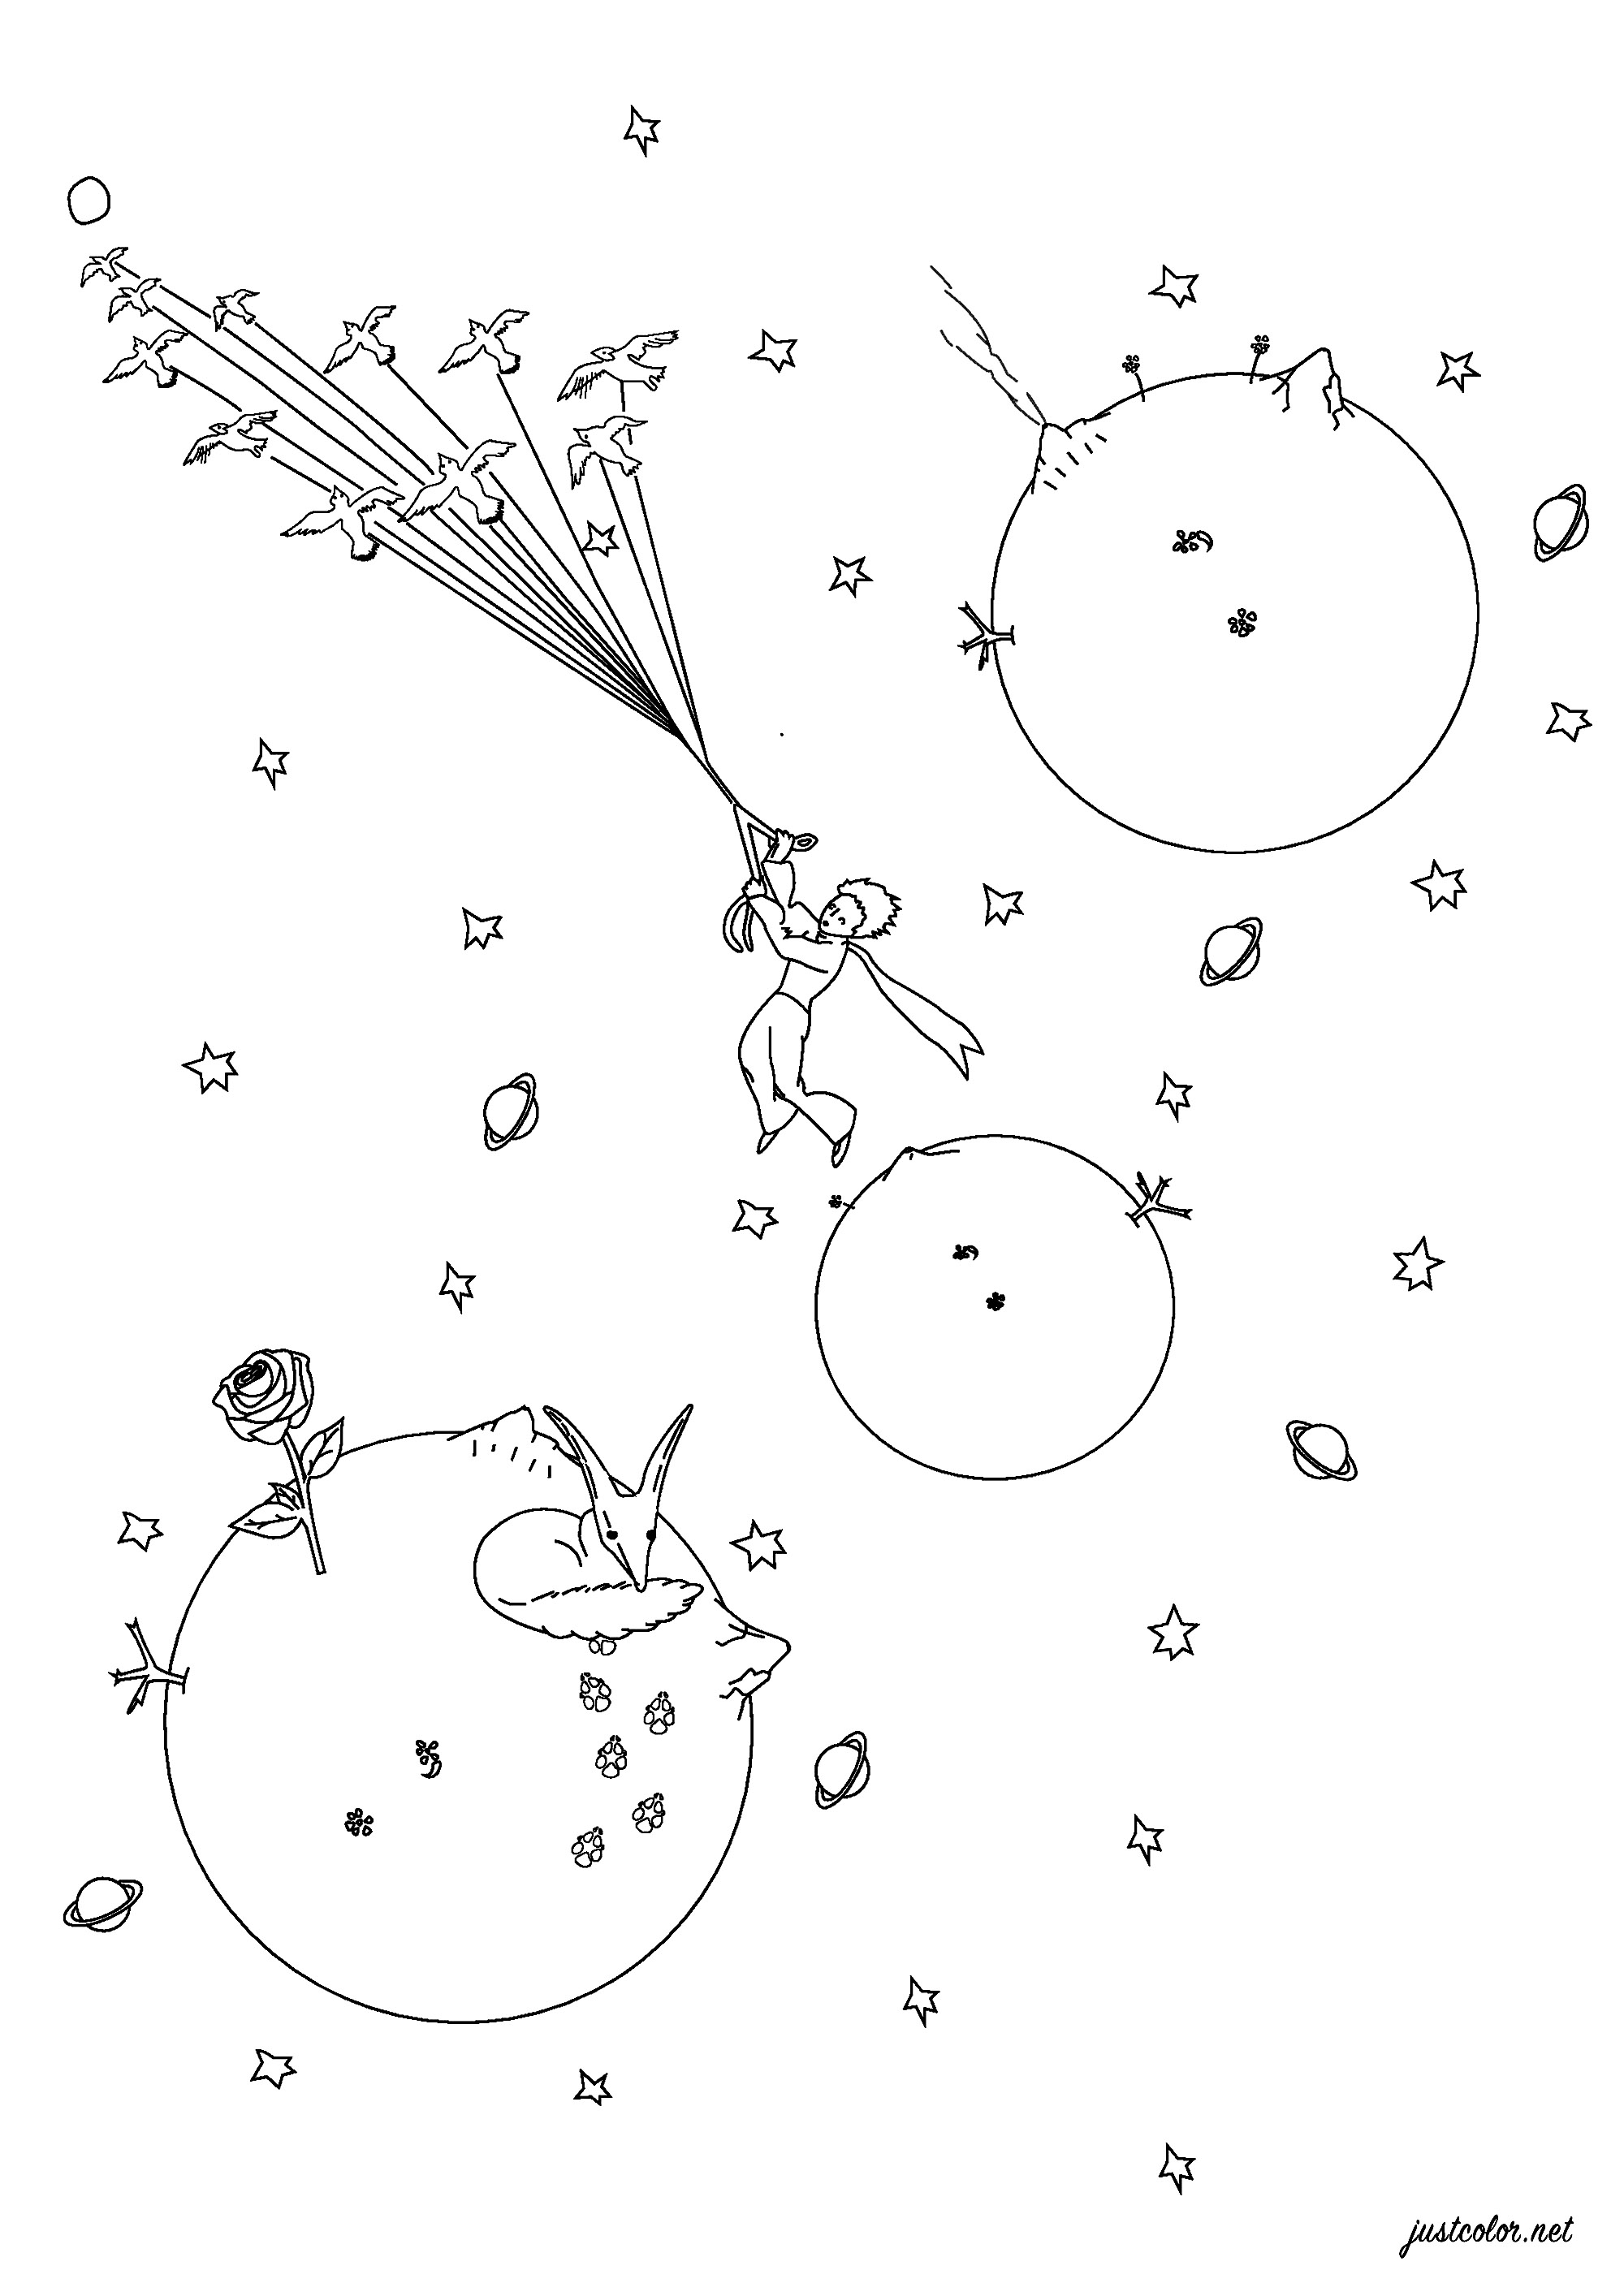 Coloring page inspired by The Little Prince by Antoine de Saint-Exupéry. First published in 1943, The Little Prince is a poetic tale, with watercolor illustrations by the author, in which a pilot stranded in the desert meets a young prince visiting Earth from a tiny asteroid, Artist : Pierre C